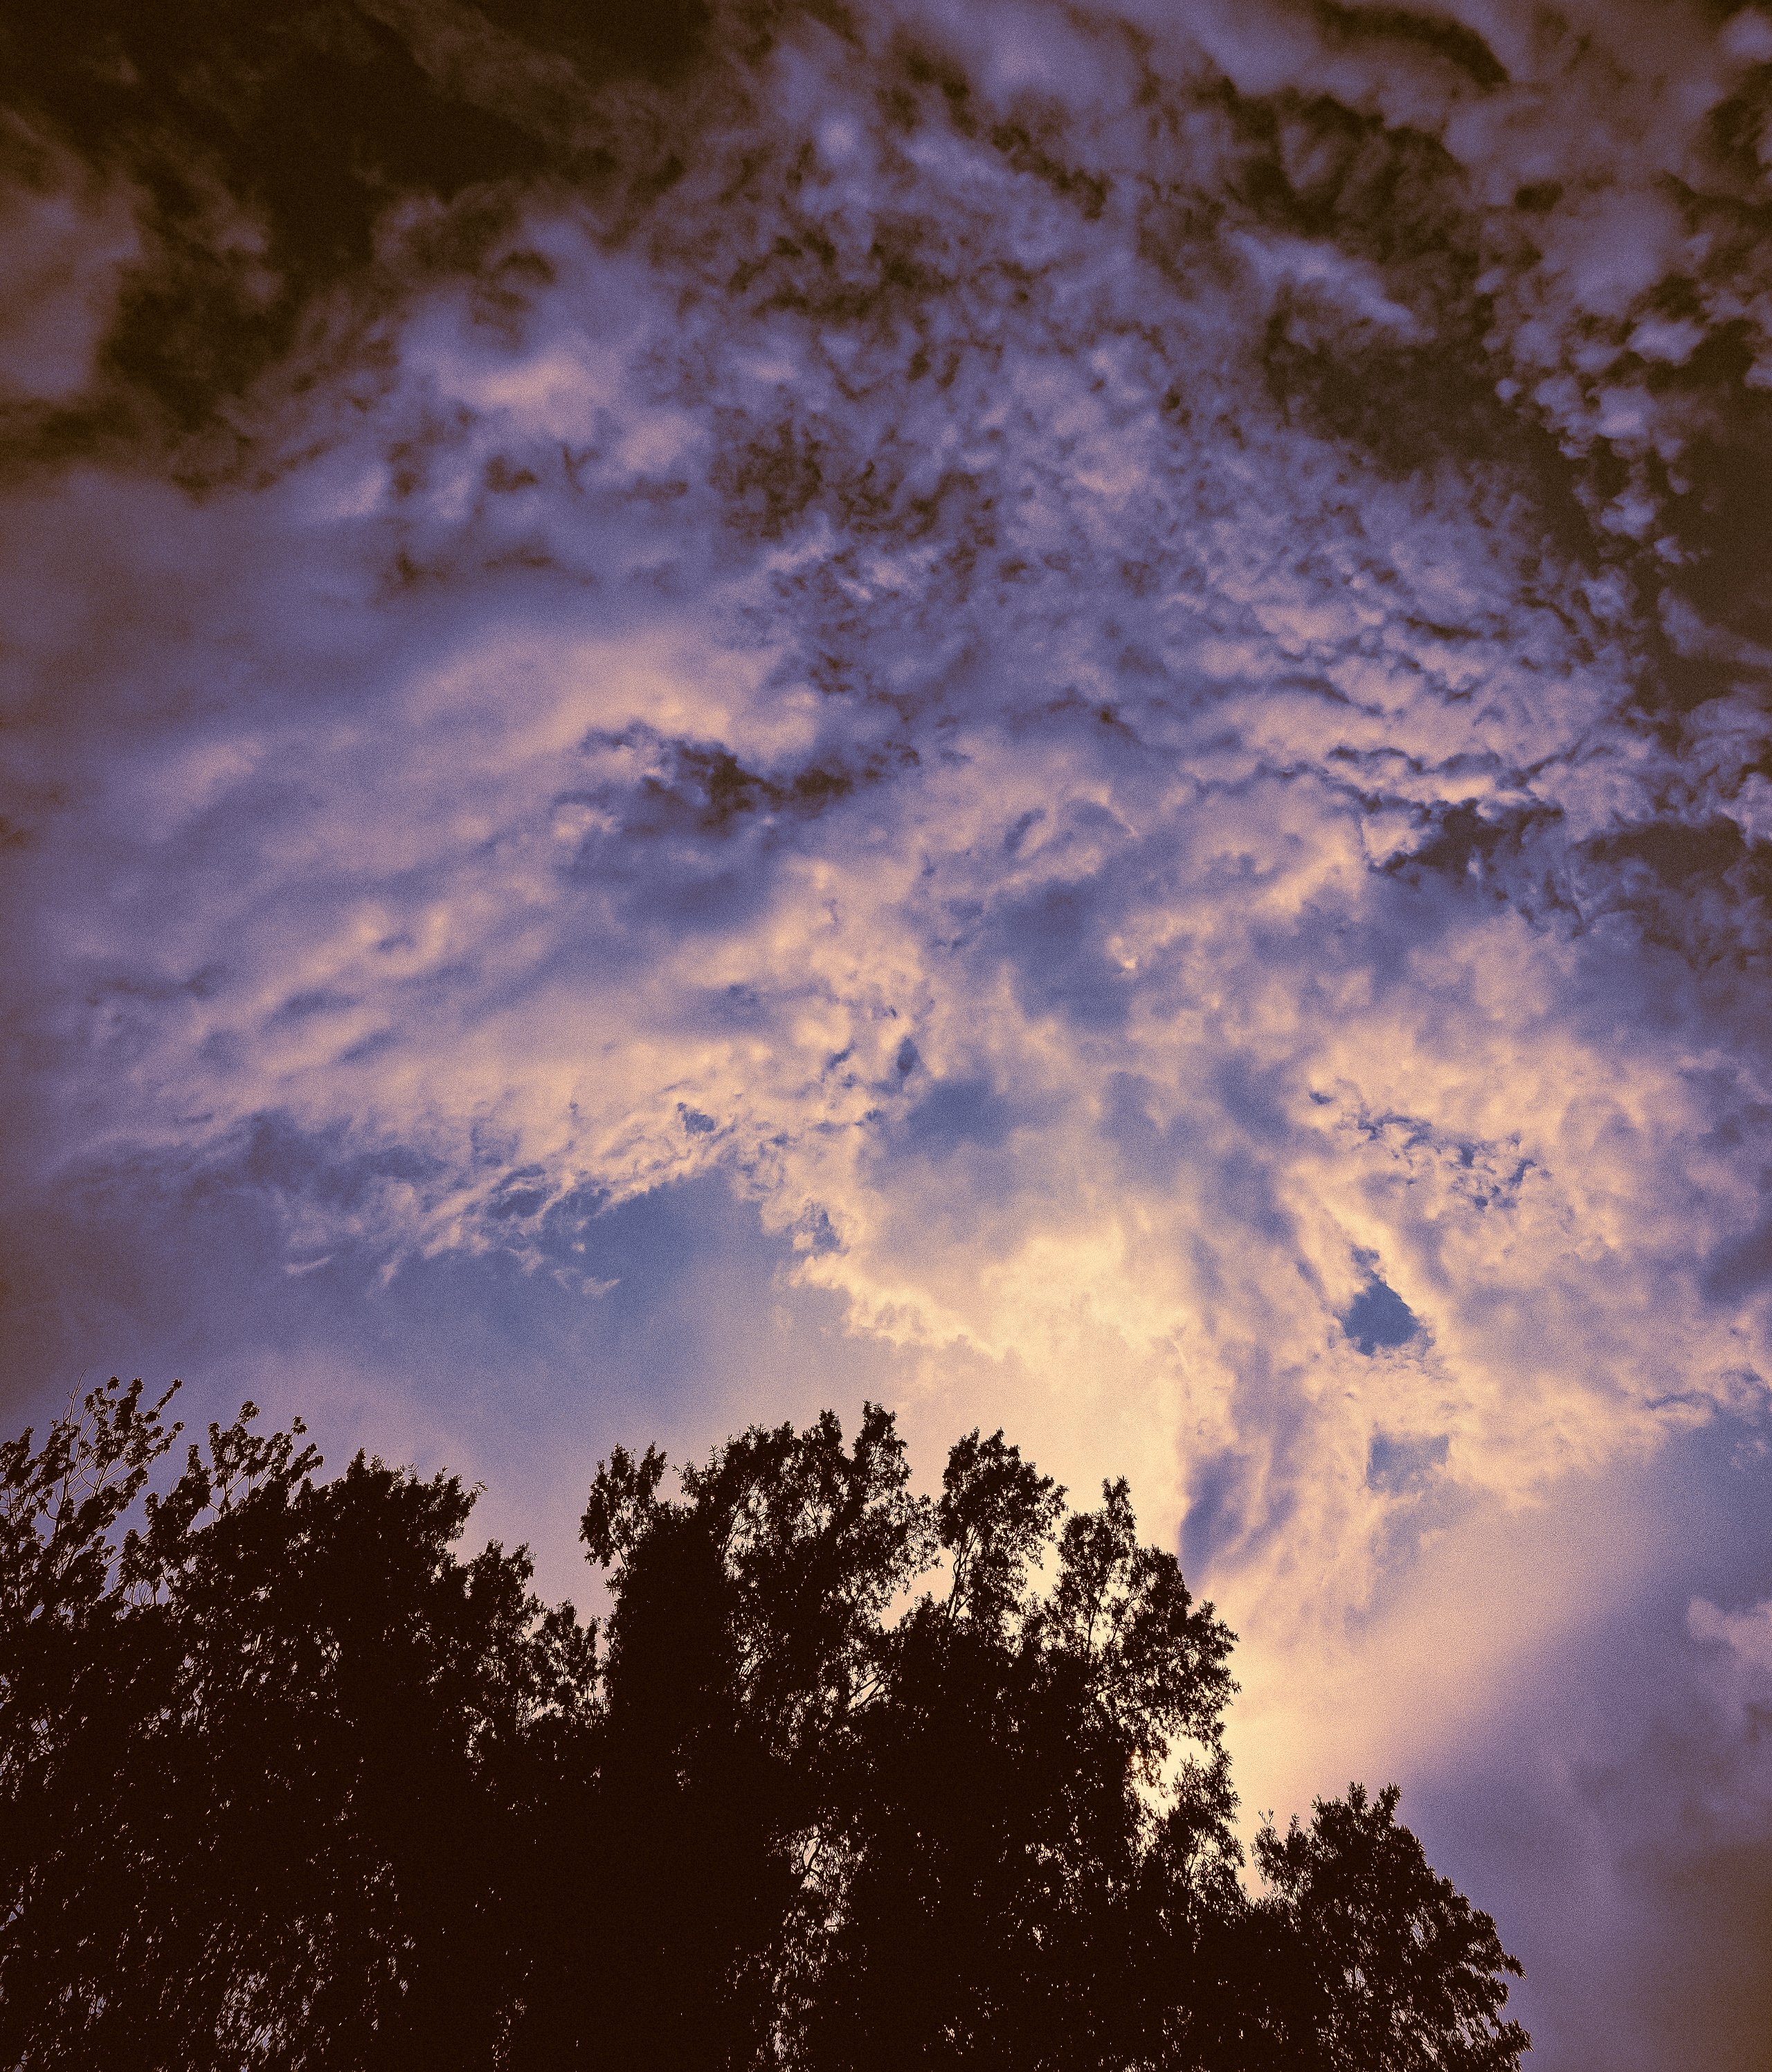 A color photo of a dramatic sky, streaked with blue and purple clouds, with trees in the foreground.